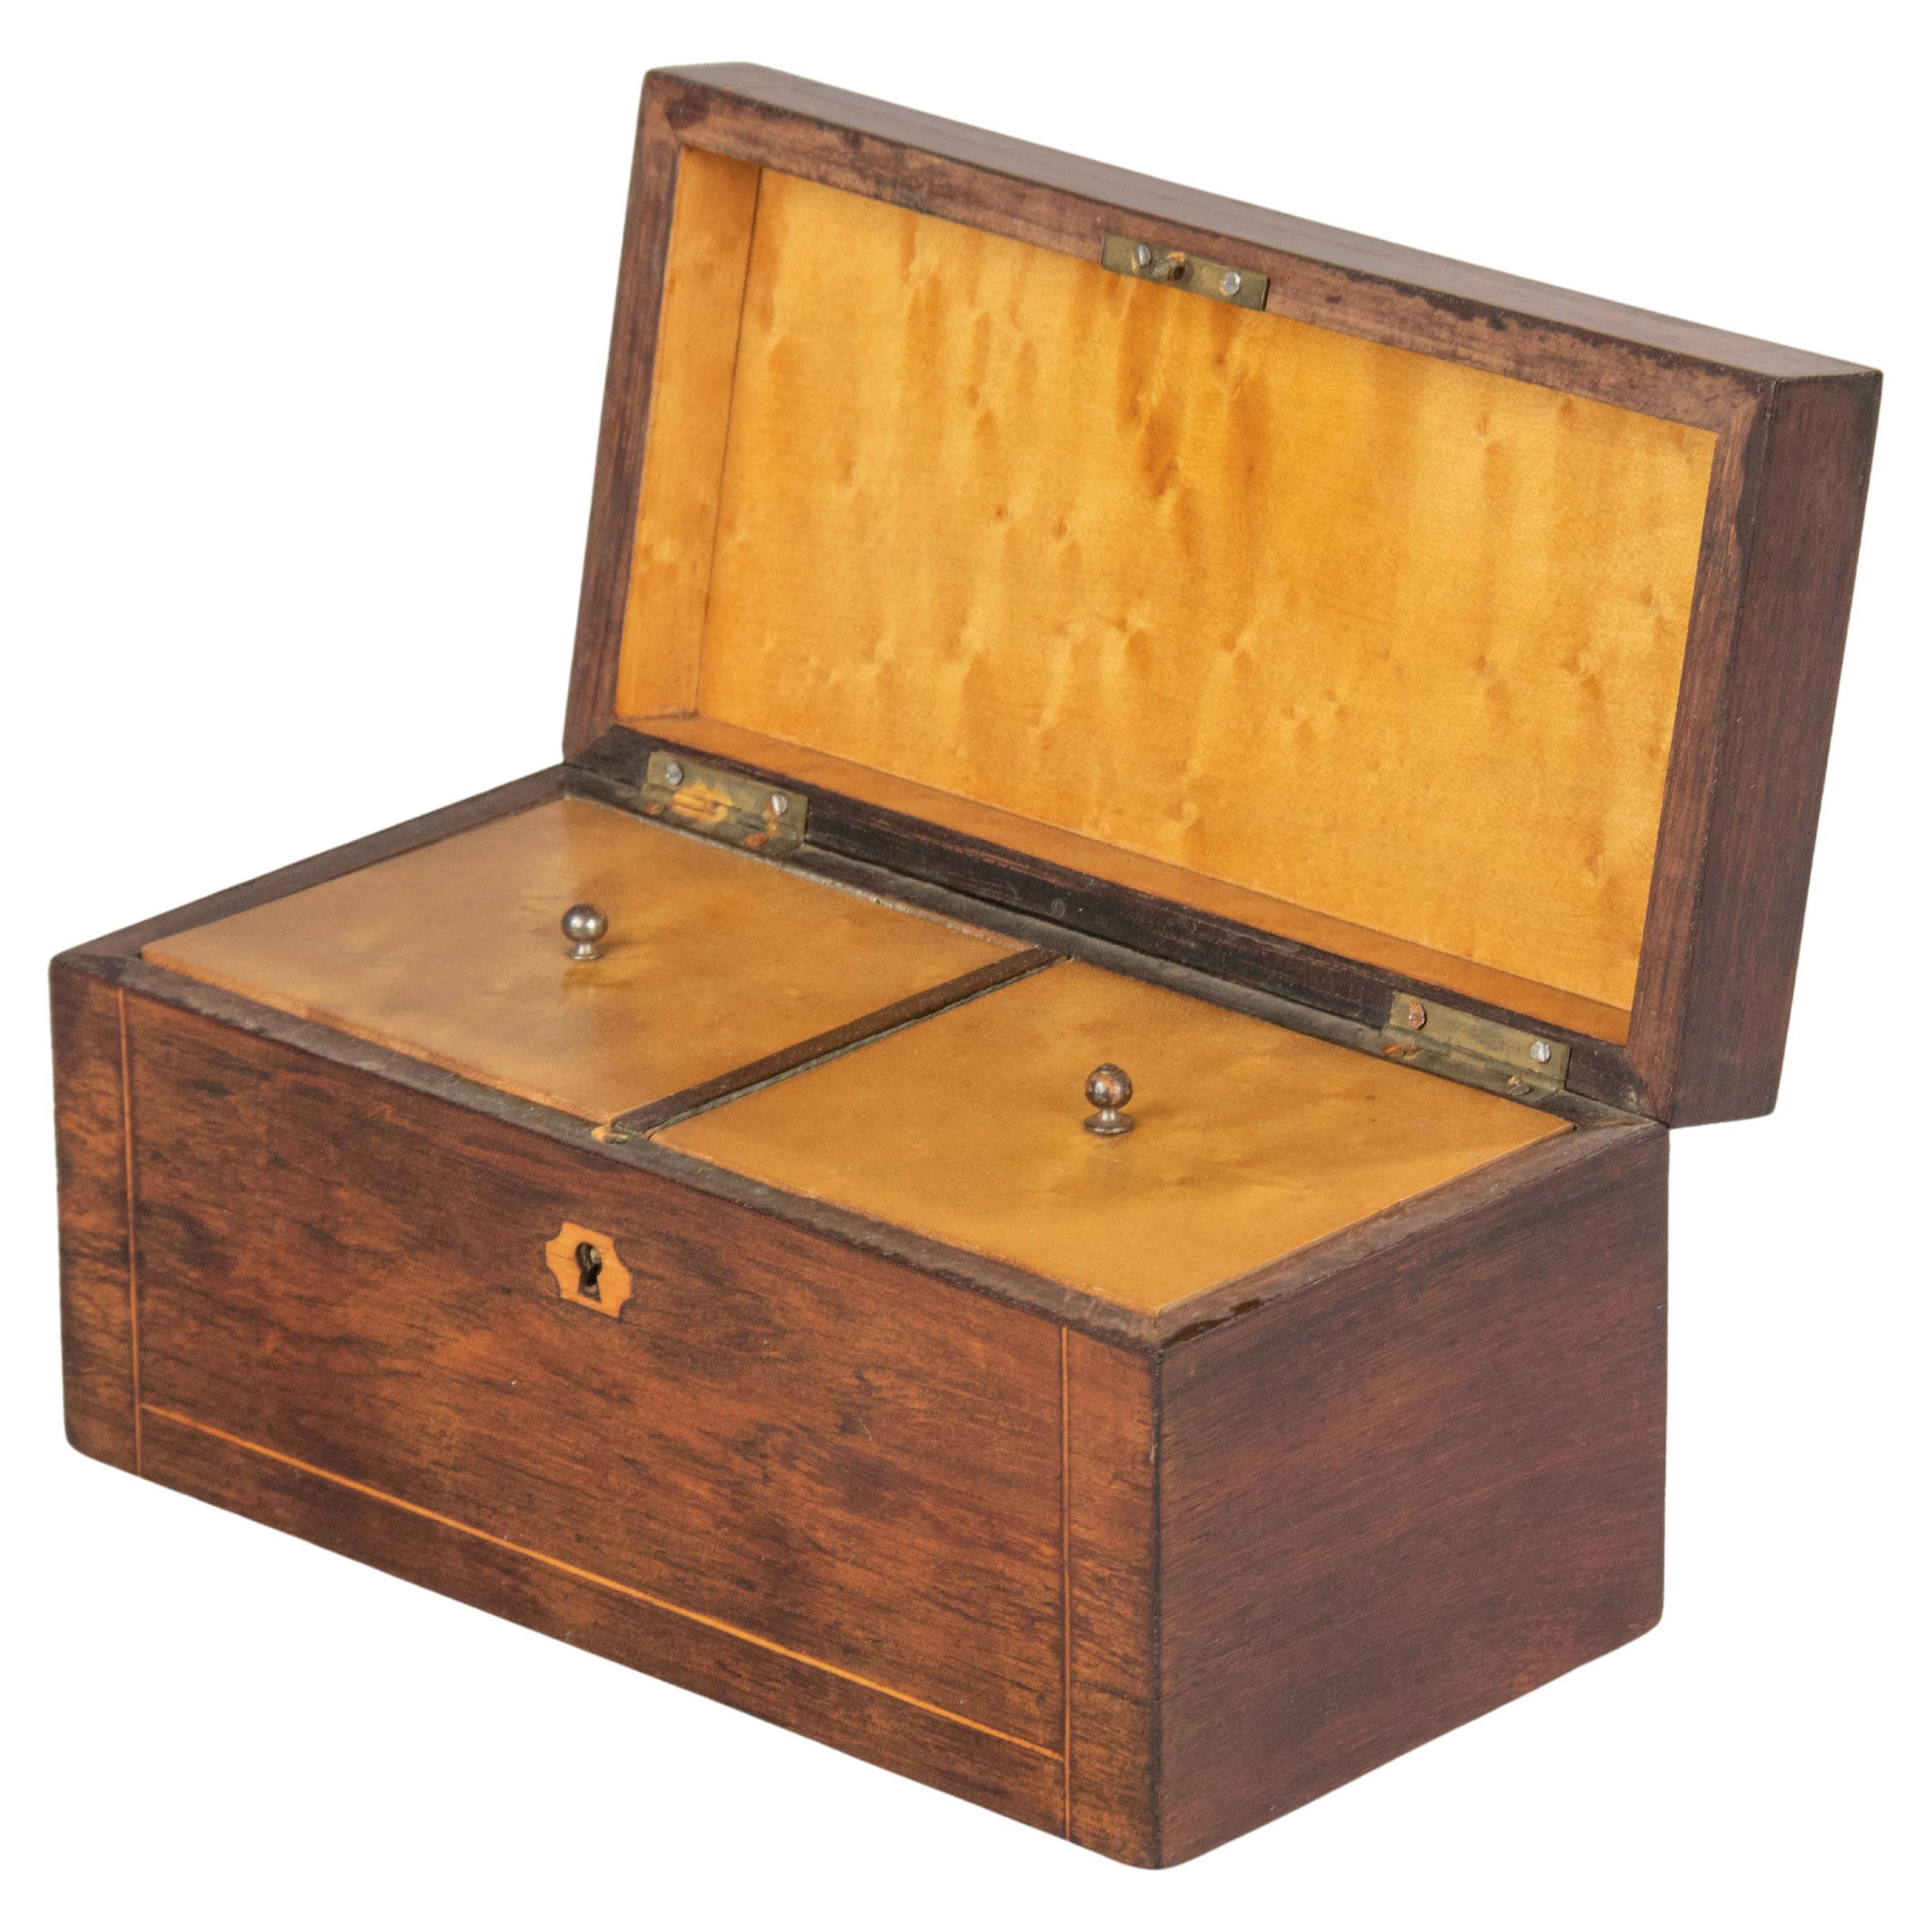 Late 19th Century French Wood Veneer Marquetry Tea Caddy